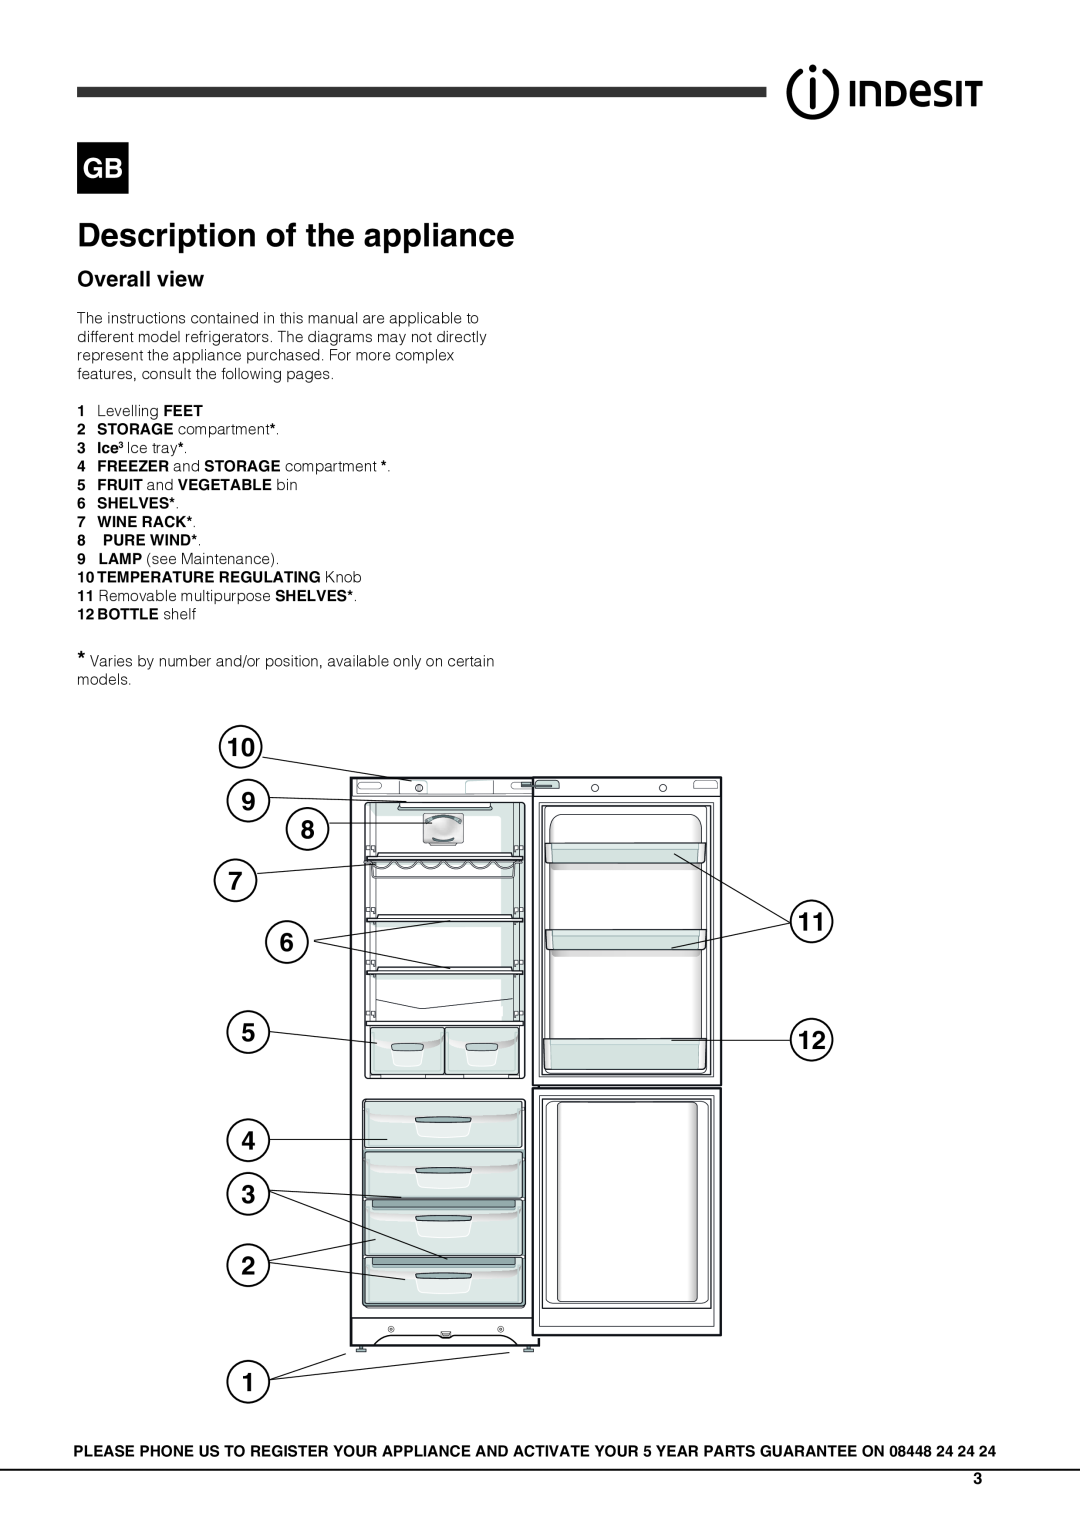 Indesit BIAAA 13 XX XX (UK) Description of the appliance, Overall view, WINE RACK 8 PURE WIND, TEMPERATURE REGULATING Knob 